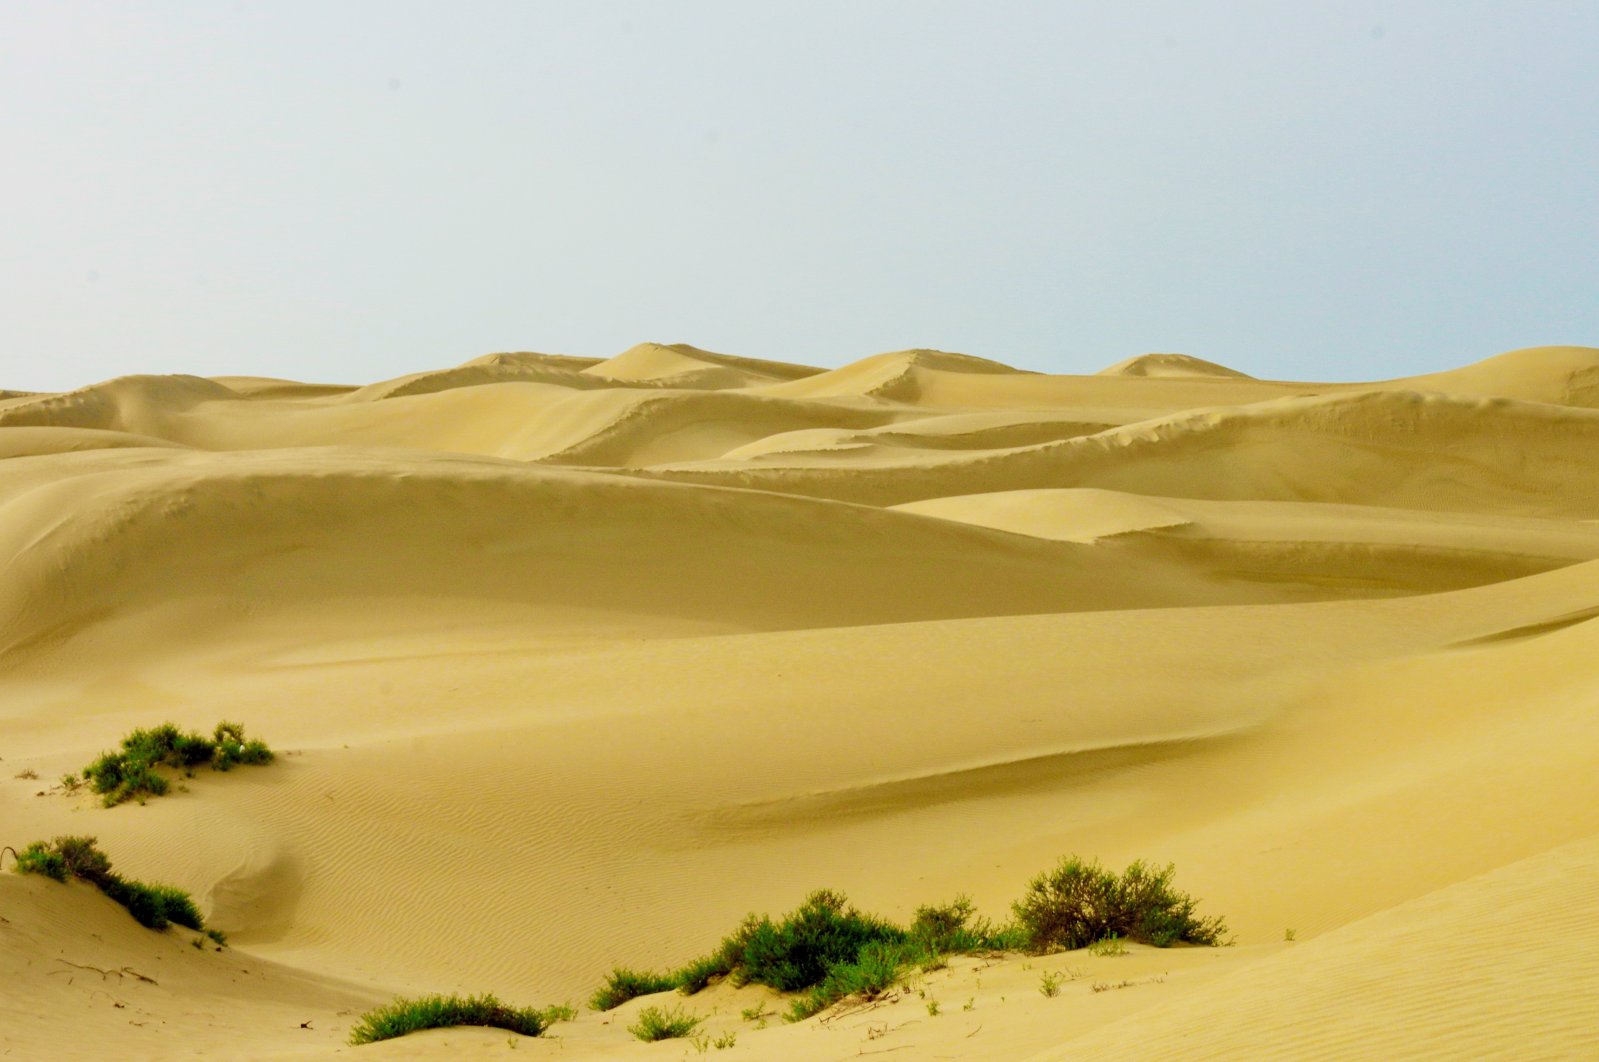 A general view of sand dunes in Sistan-Baluchestan, Iran. (Getty Images)